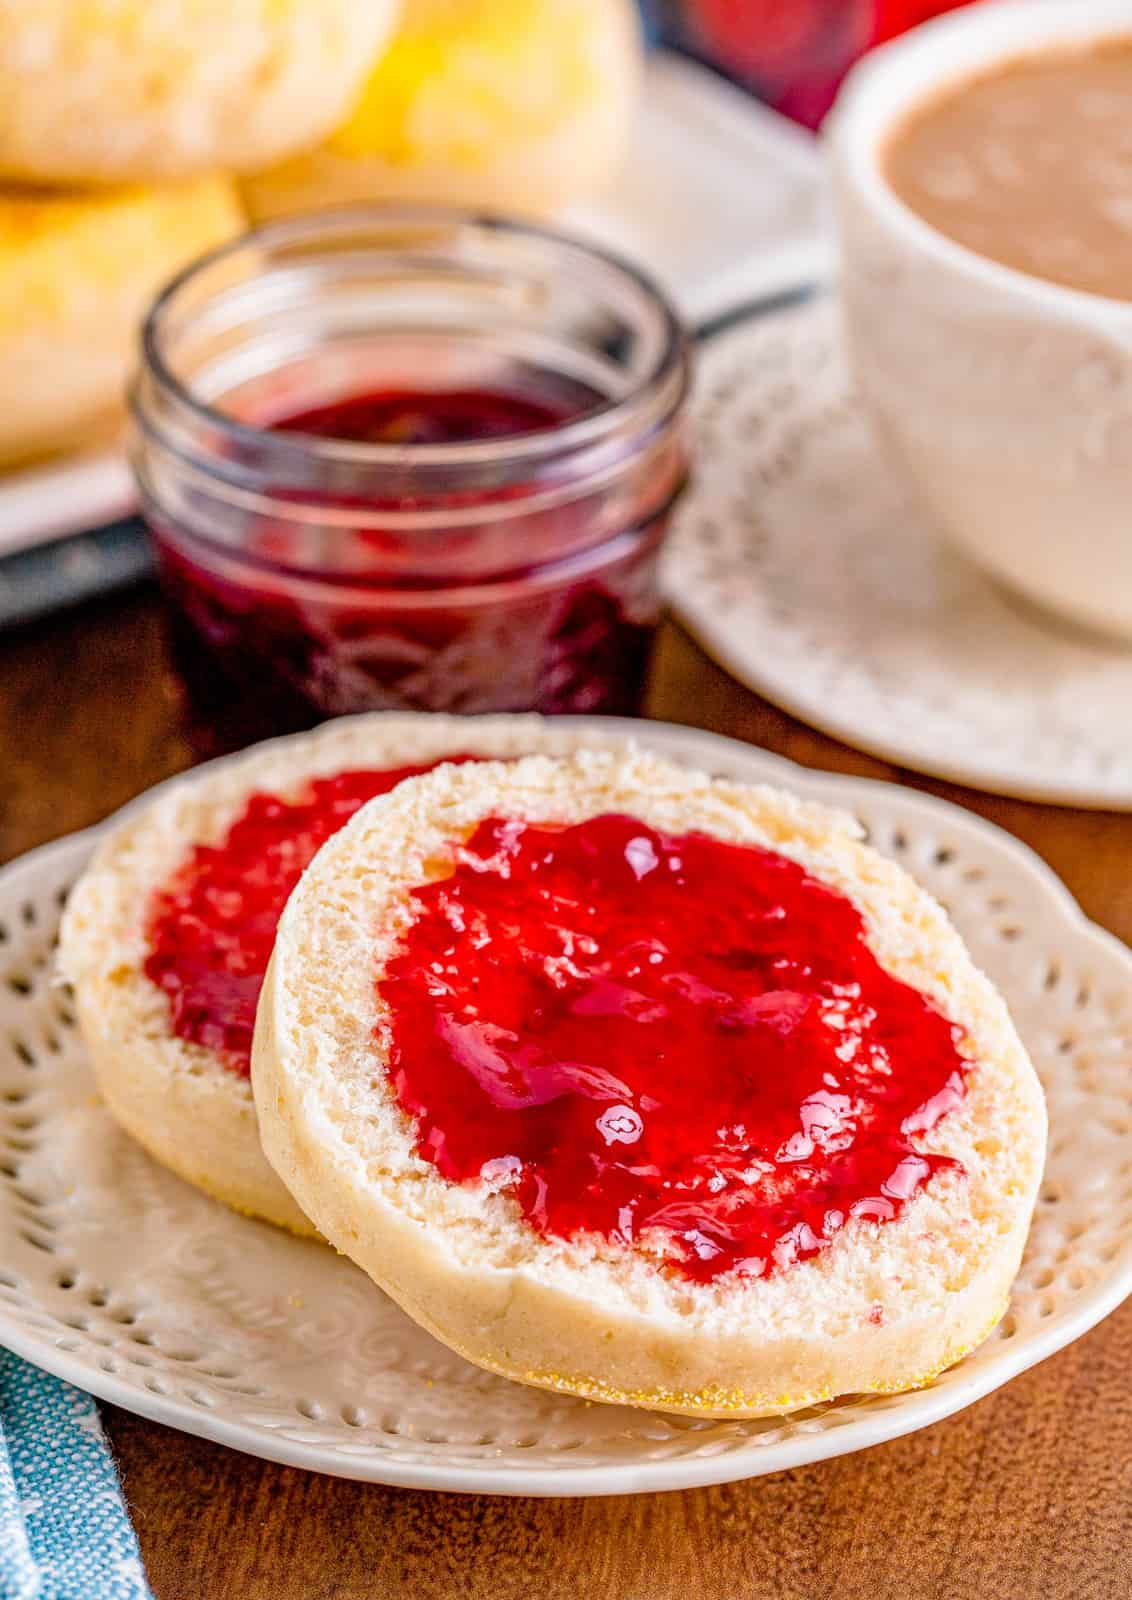 One split English Muffin on white plate spread with jelly.